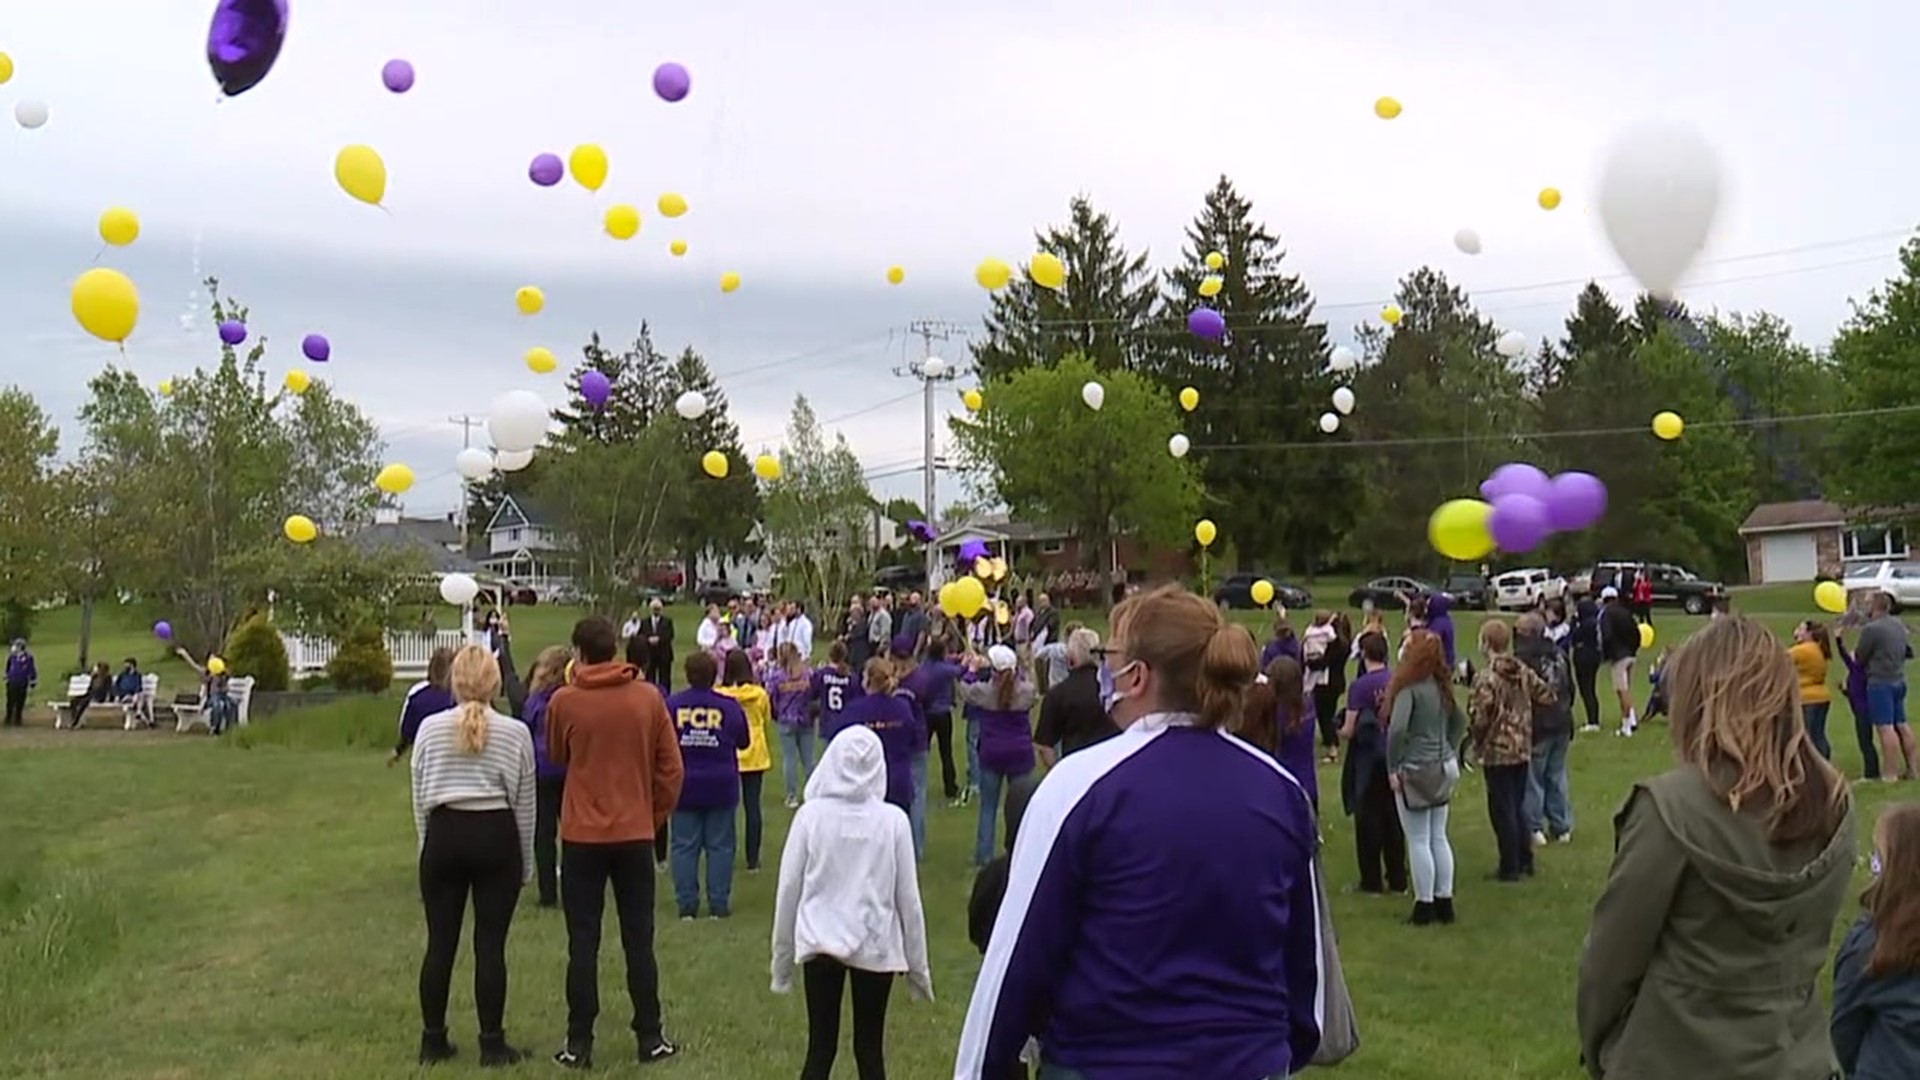 His classmates couldn't attend his funeral, so they came together to honor him in a different way.